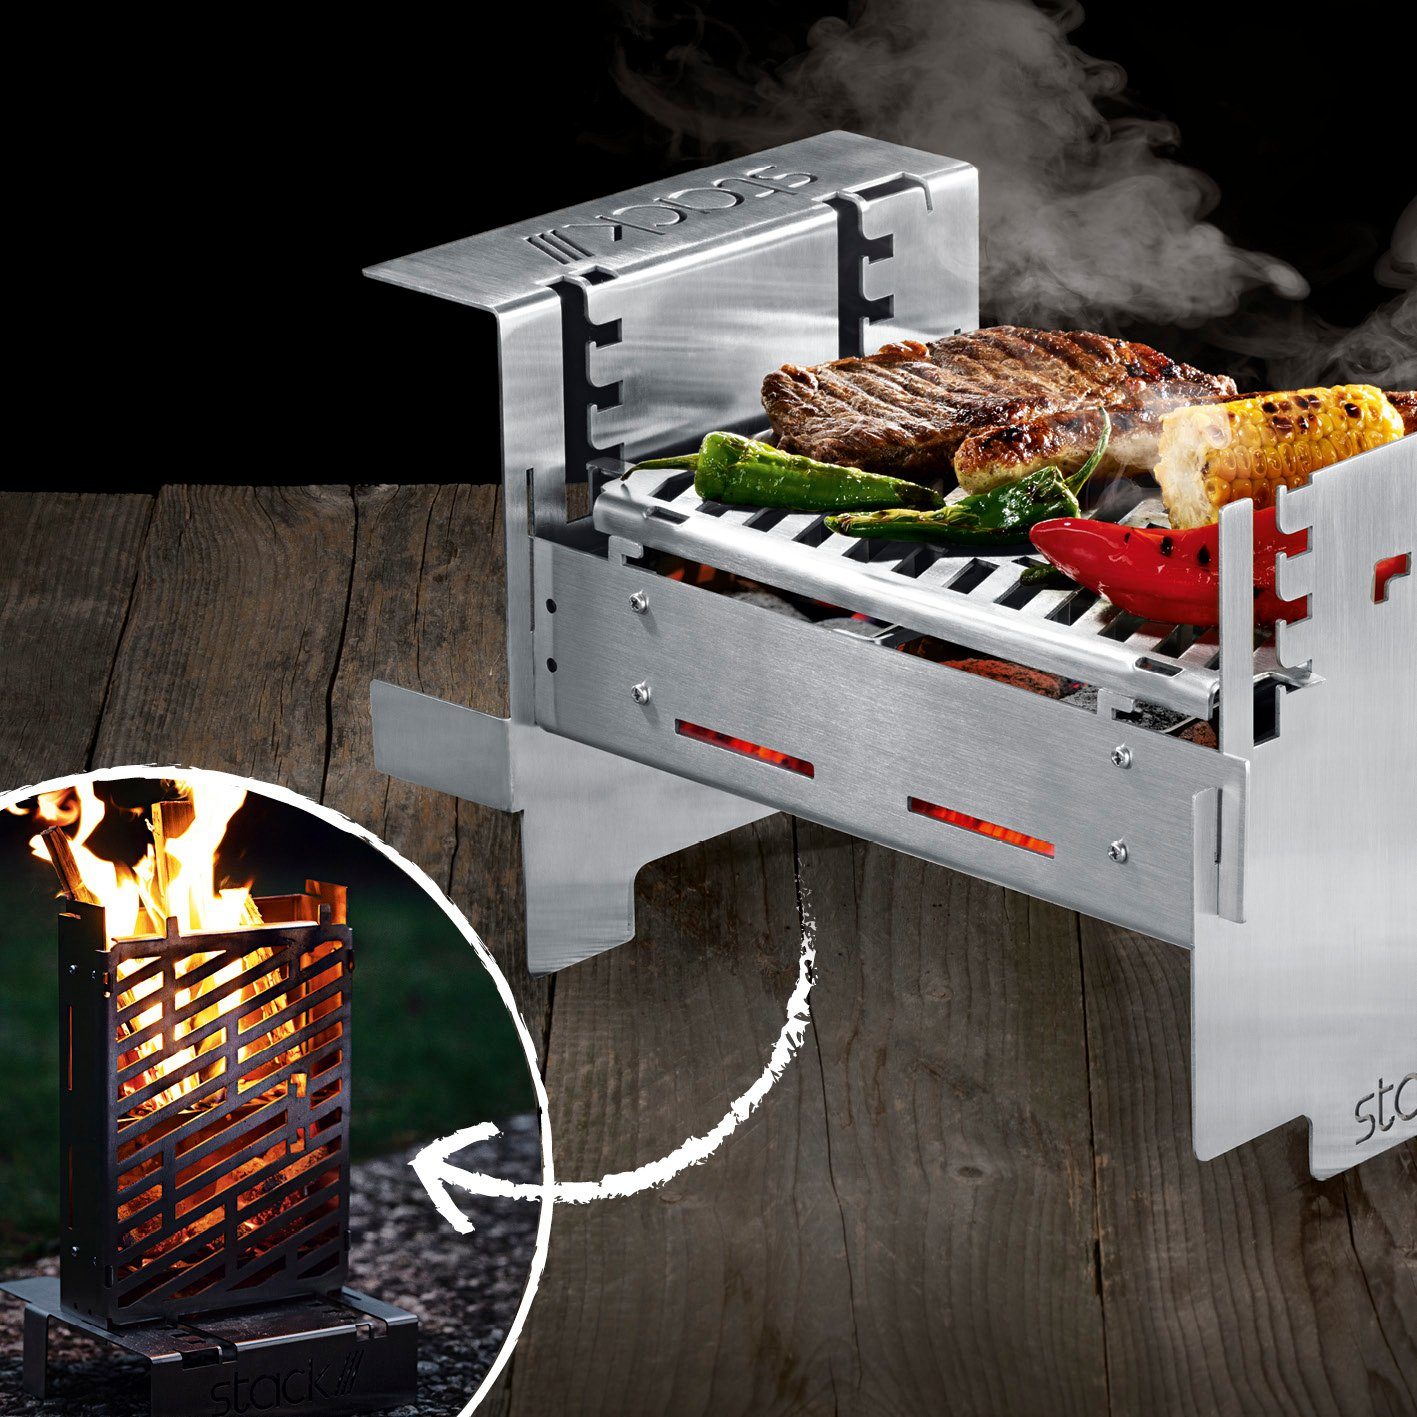 cm 21 27 x und Stack Trangia Grill stack///grill Holzkohlegrill Feuerkorb Feuerstelle in stack 1 n' grill, 2 Grillfläche